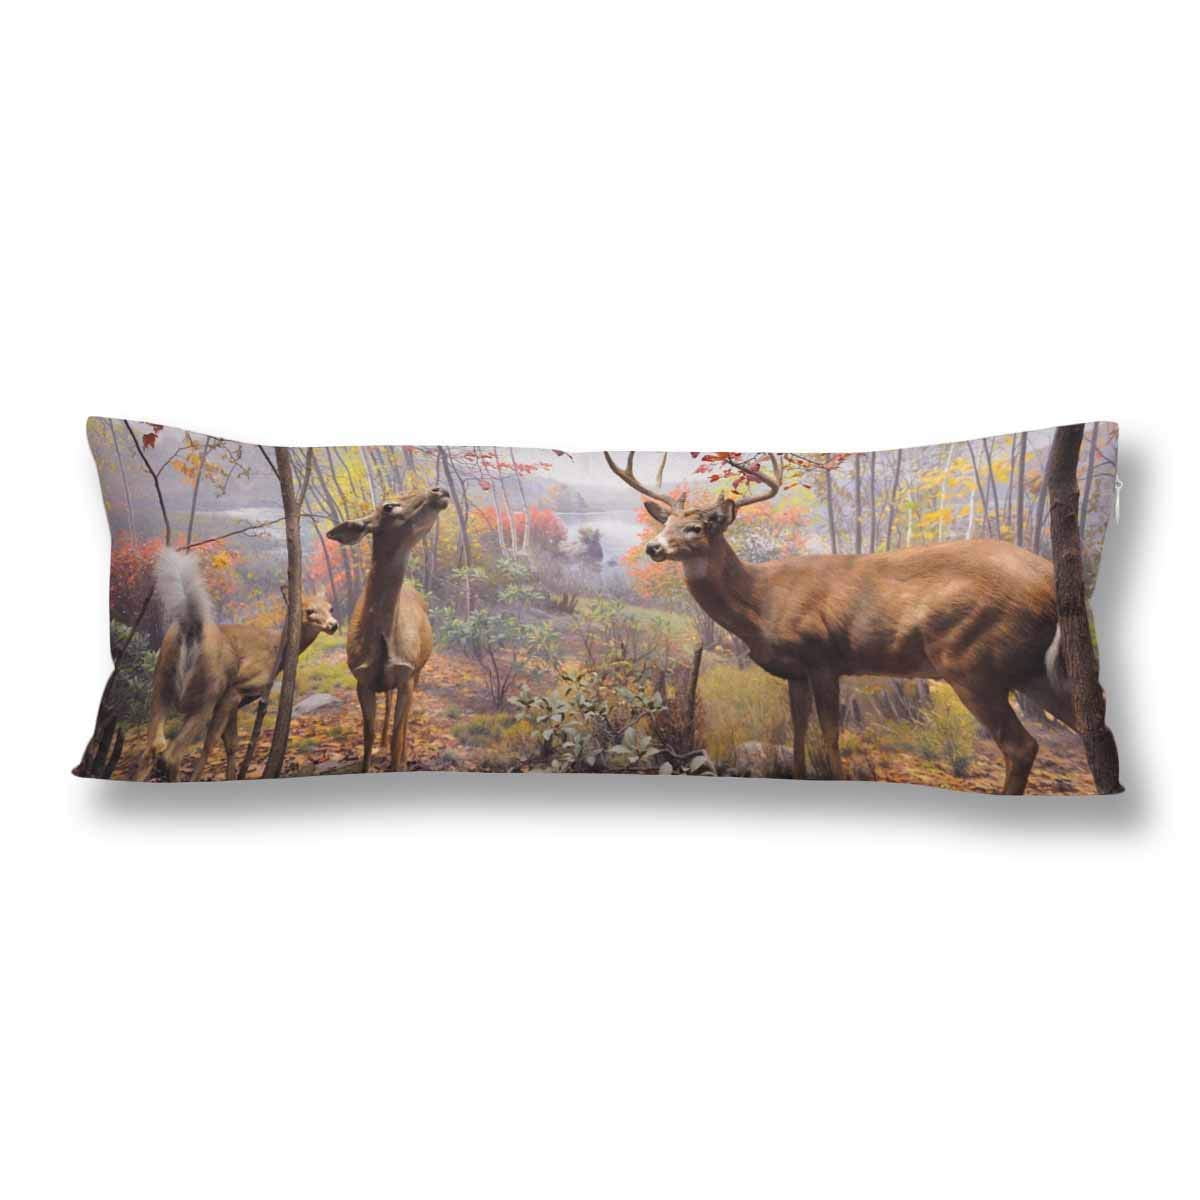 ABPHOTO Cute Deer Tree Forest Animal Body Pillow Covers Case Protector